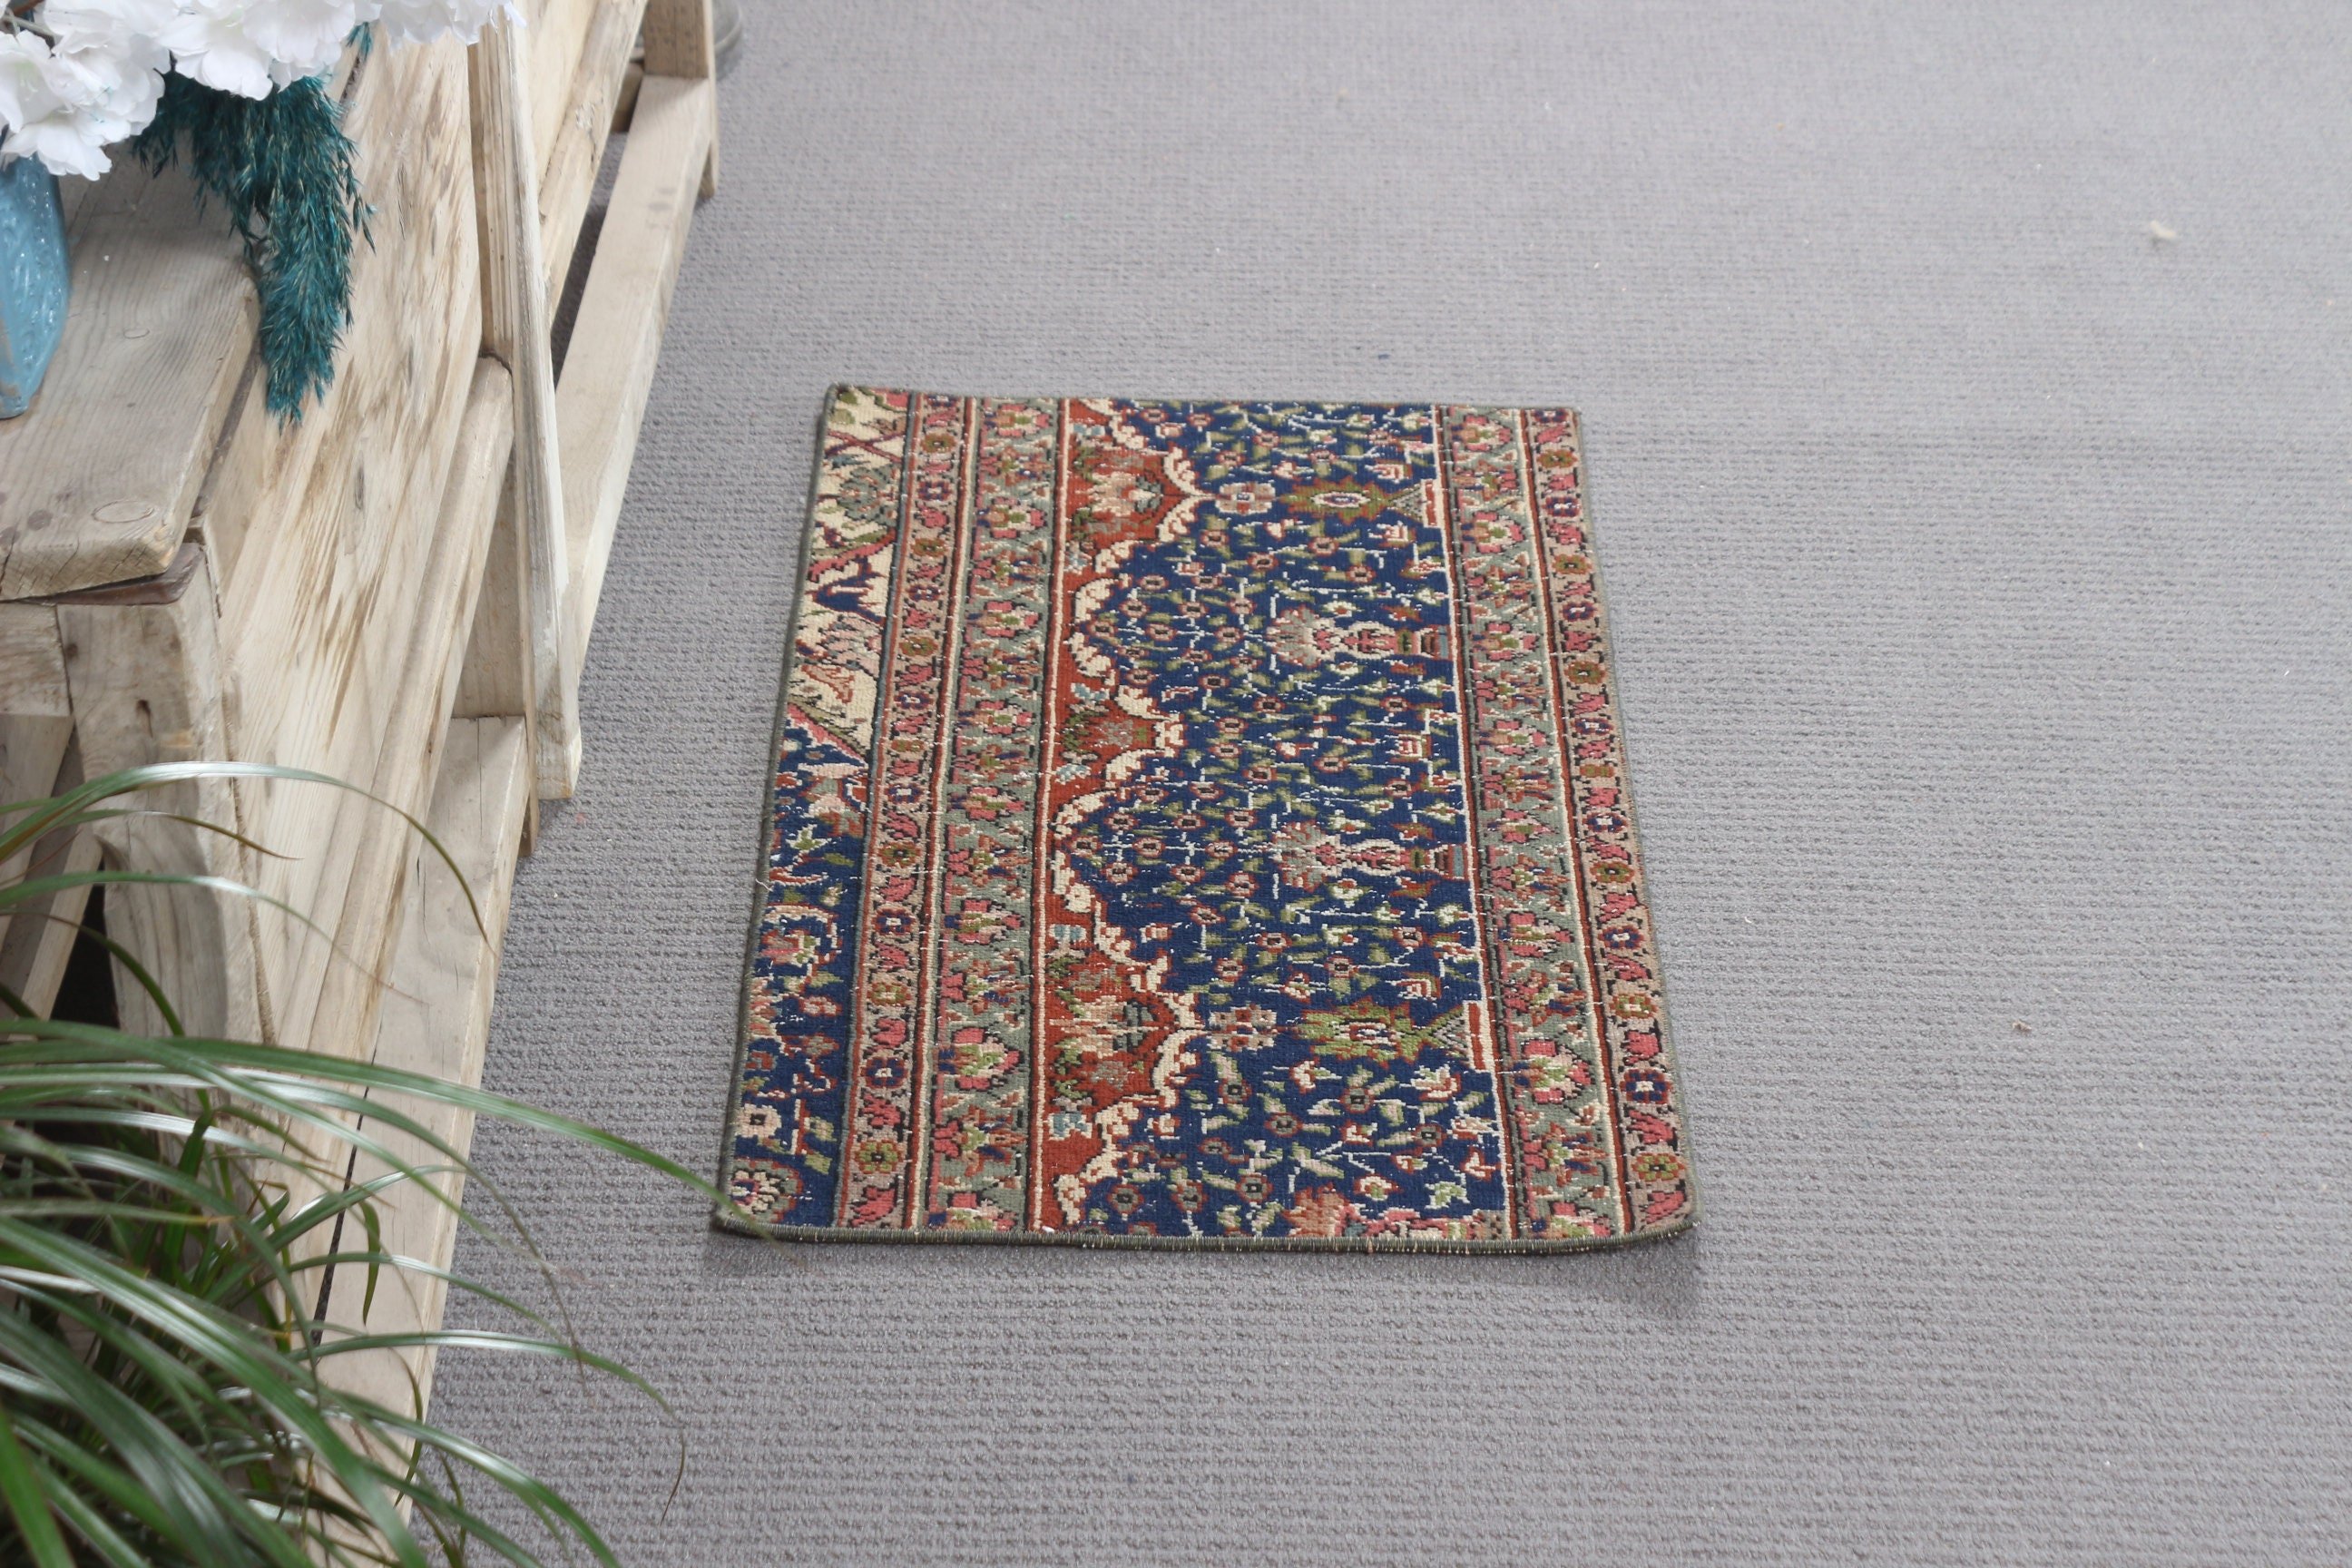 Brown  1.5x2.8 ft Small Rugs, Entry Rug, Vintage Rugs, Hand Woven Rug, Kitchen Rug, Turkish Rugs, Oushak Rugs